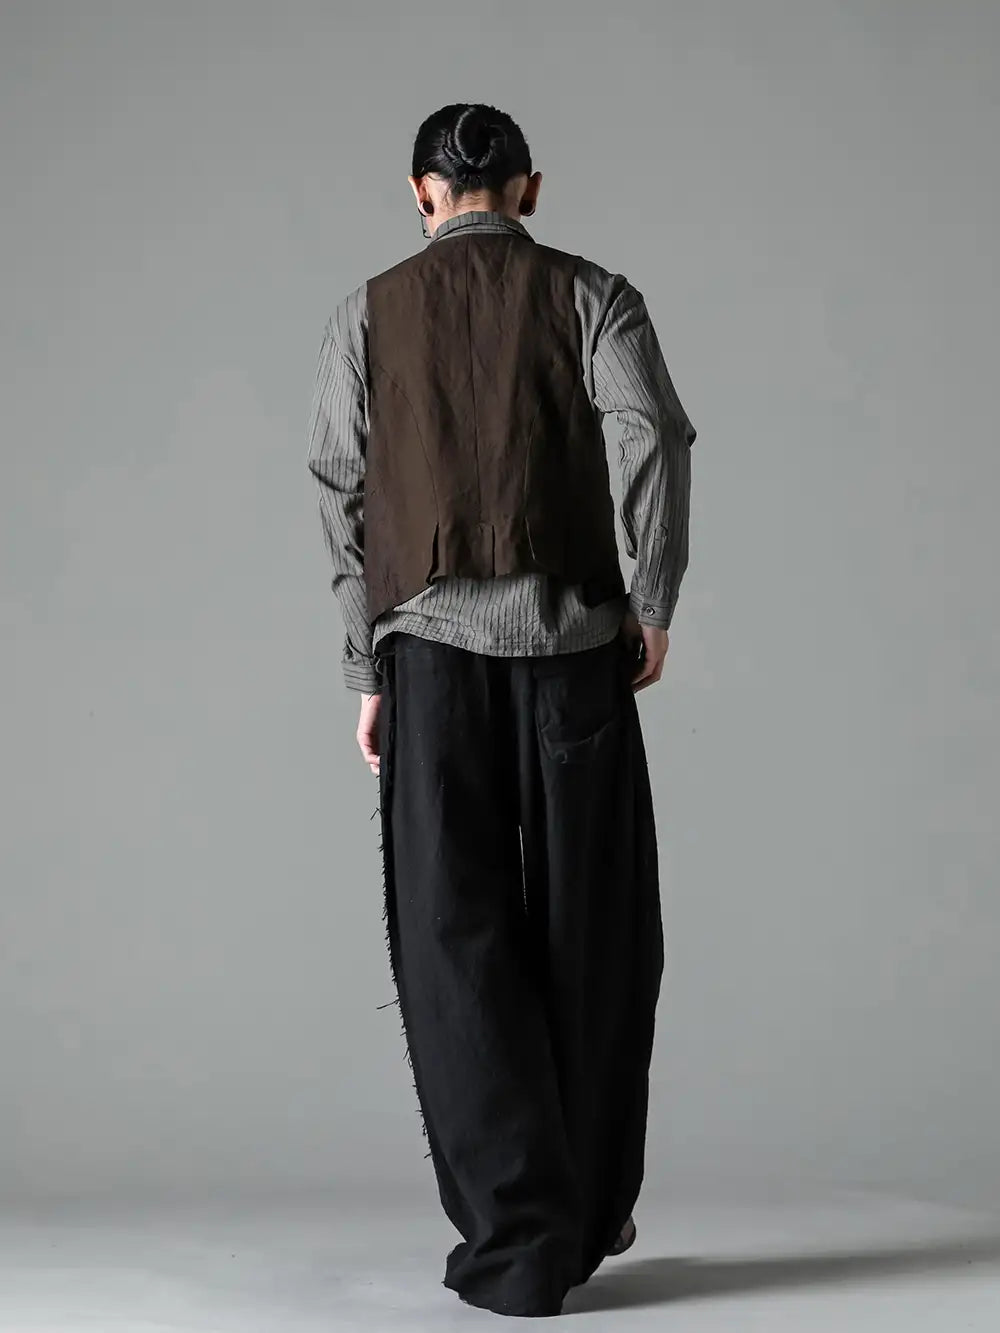 Chiahung Su ZIGGY CHEN 24SS - Artisan style recommended for spring and summer - 0M2410101 PatchWork Double Breasted Waist Coat - SS24-FS8-COS Asymmetrical Hand Dyed Stripe Shirt - SS24-MP16-CWO Hand Dyed Rawing Wide Legs Trouser - 992X-CO149T Classic Derby Shoes Laced Up Single Sole - Horse Full Grain - 992X CO149T 1-005